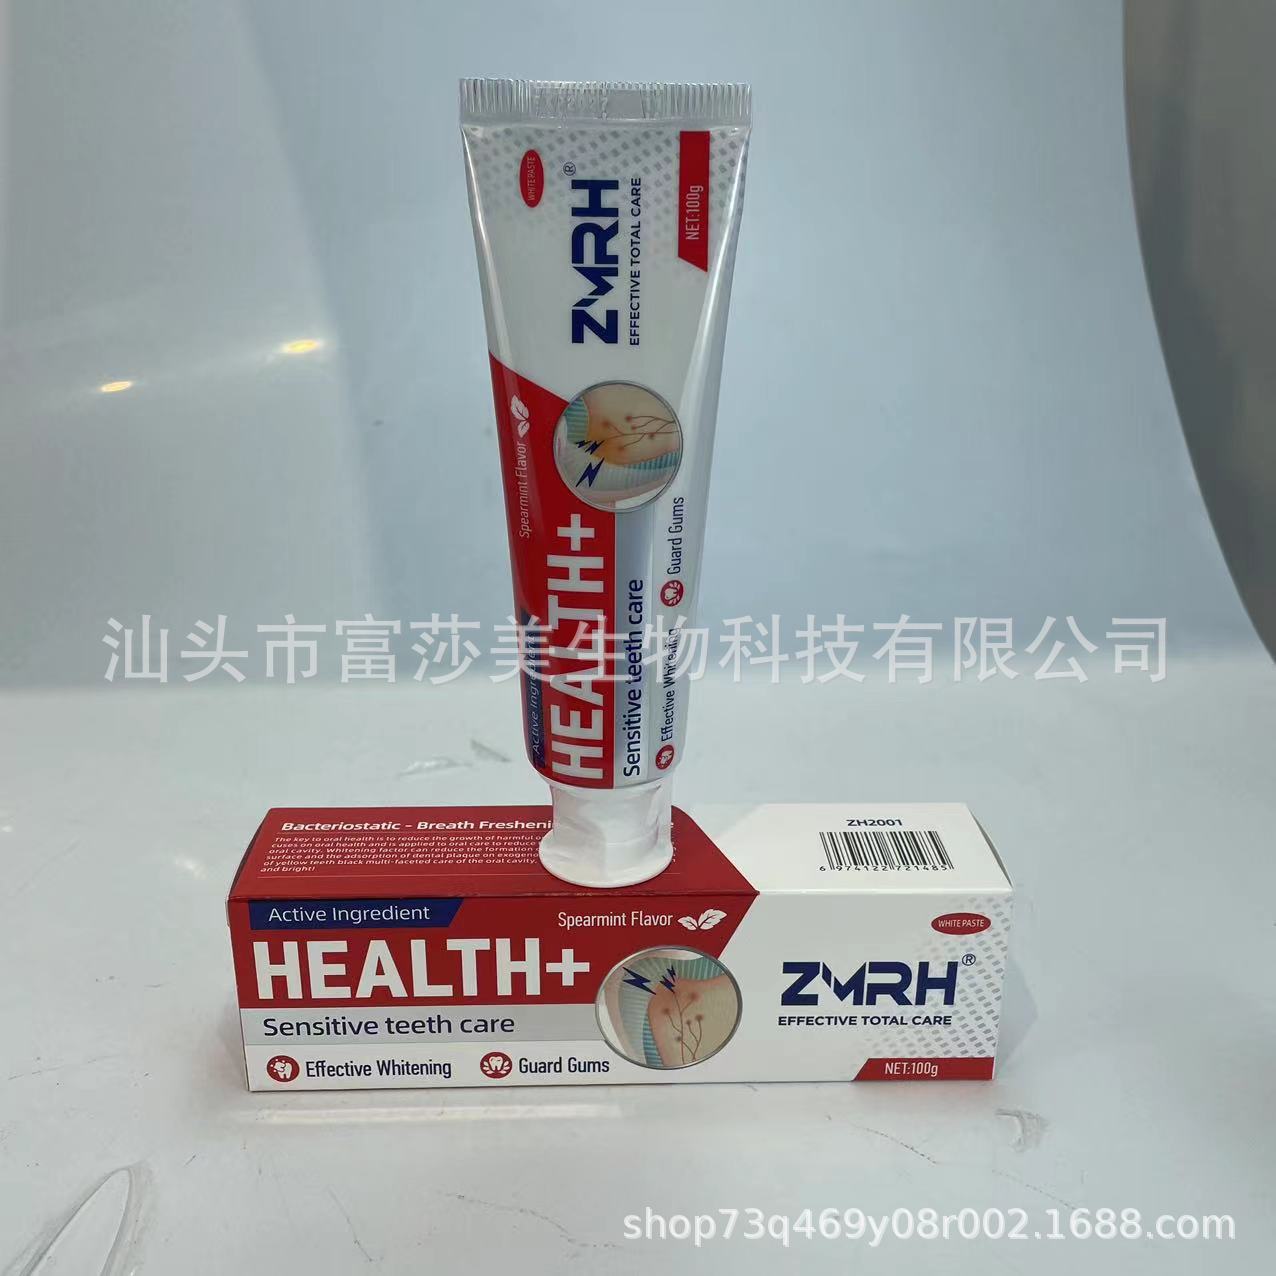 100G Toothpaste Spot Sensitive Teeth Care Foreign Trade Export Uk Southeast Asia Cambodia Thailand Wholesale